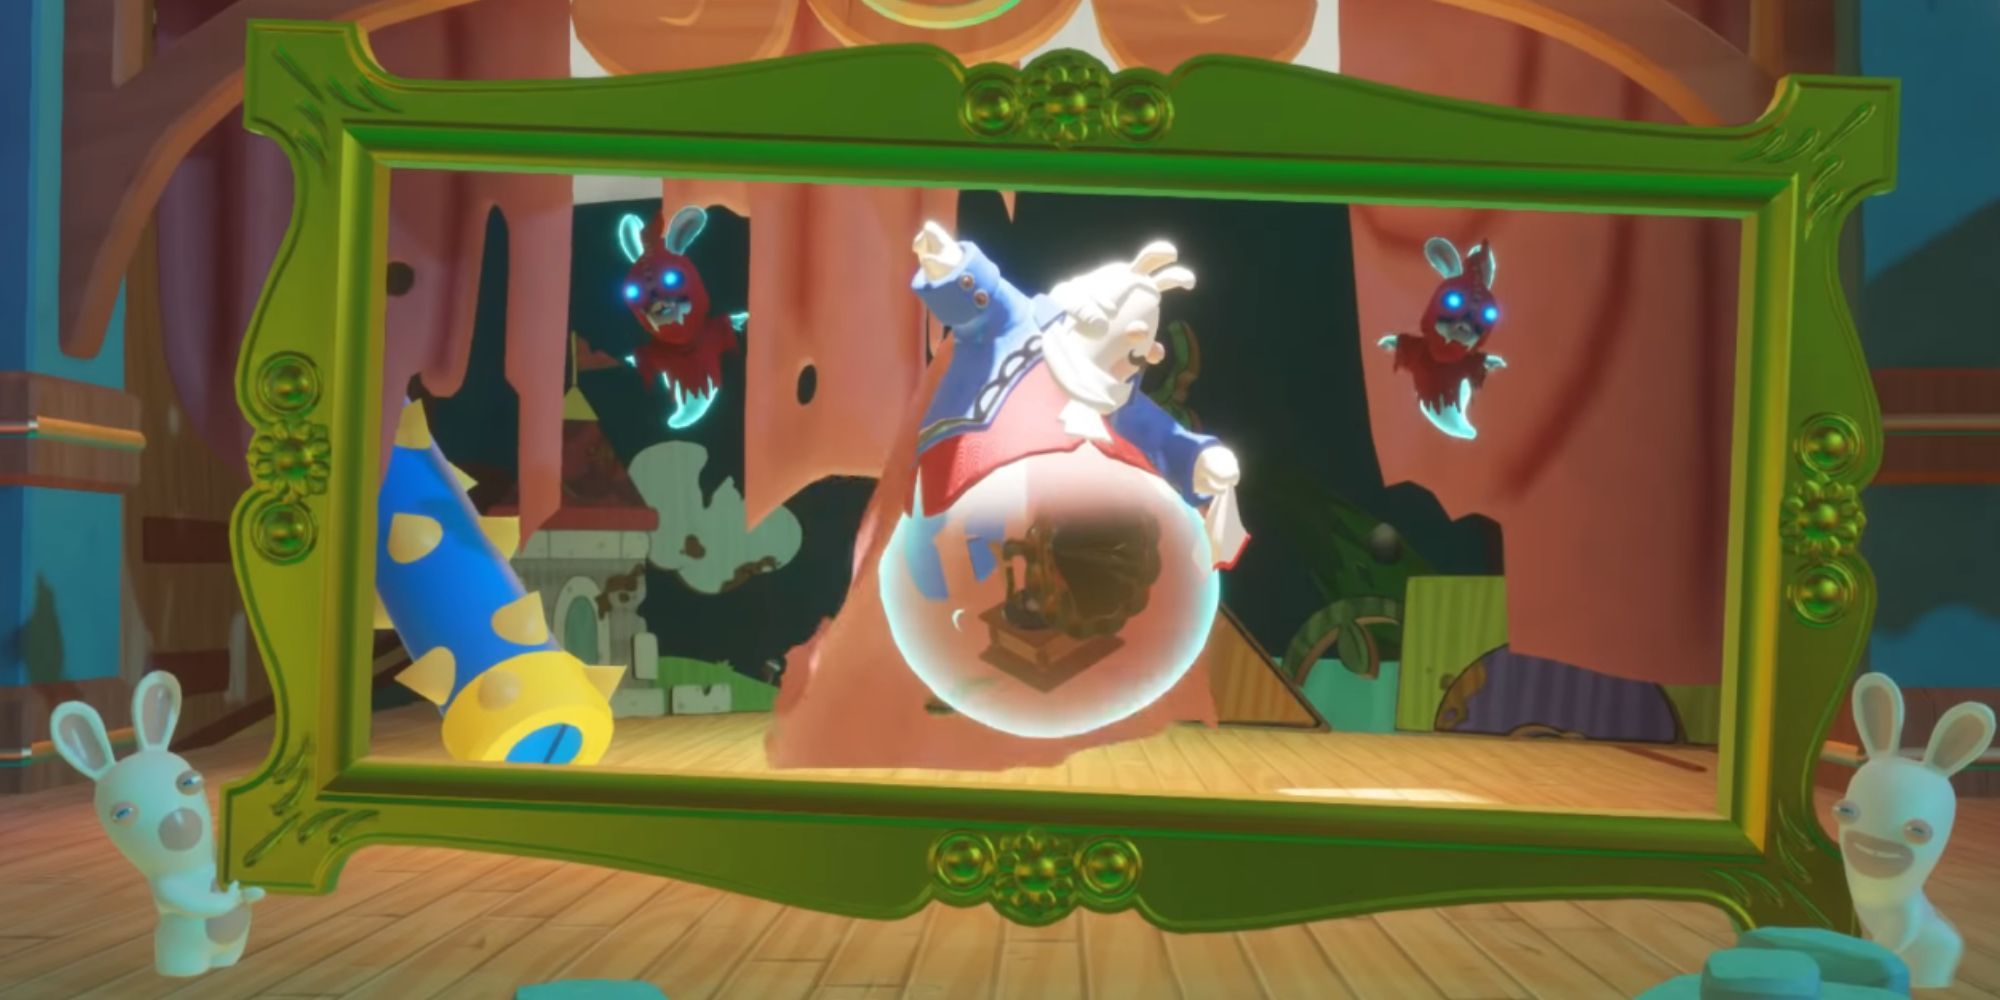 Phantom poses in a frame held by rabbids on a stage